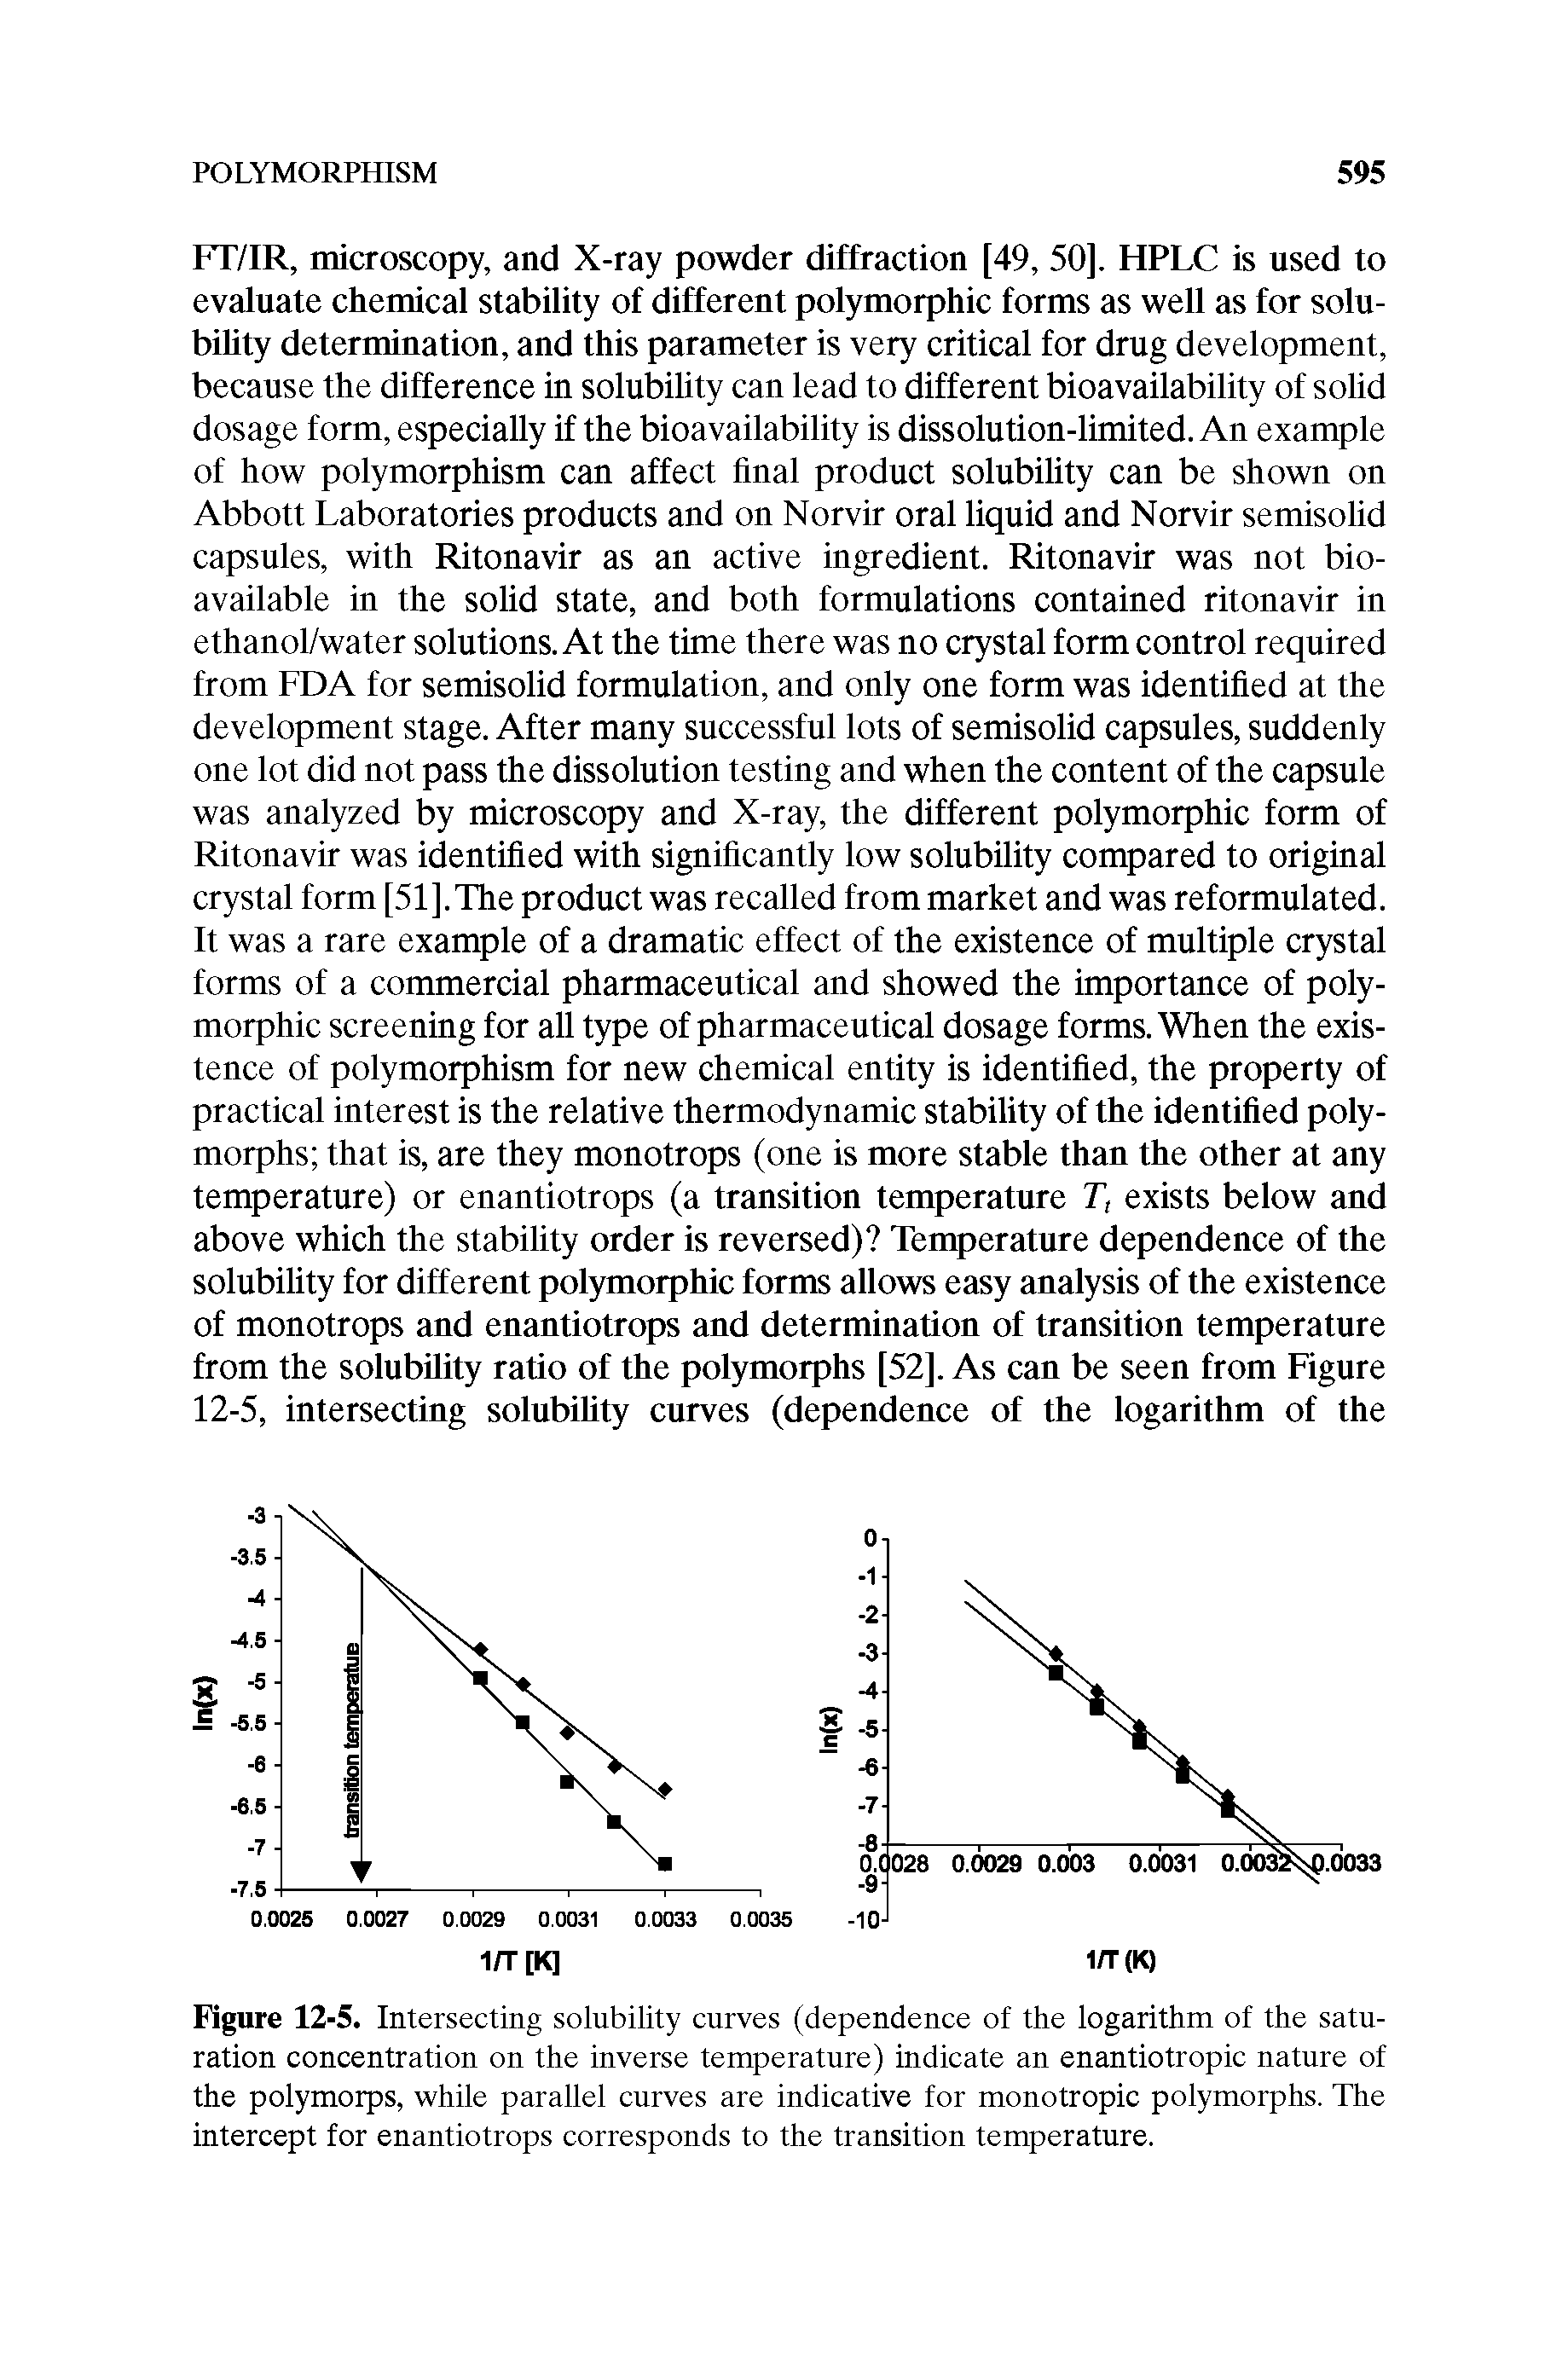 Figure 12-5. Intersecting solubility curves (dependence of the logarithm of the saturation concentration on the inverse temperature) indicate an enantiotropic nature of the polymorps, while parallel curves are indicative for monotropic polymorphs. The intercept for enantiotrops corresponds to the transition temperature.